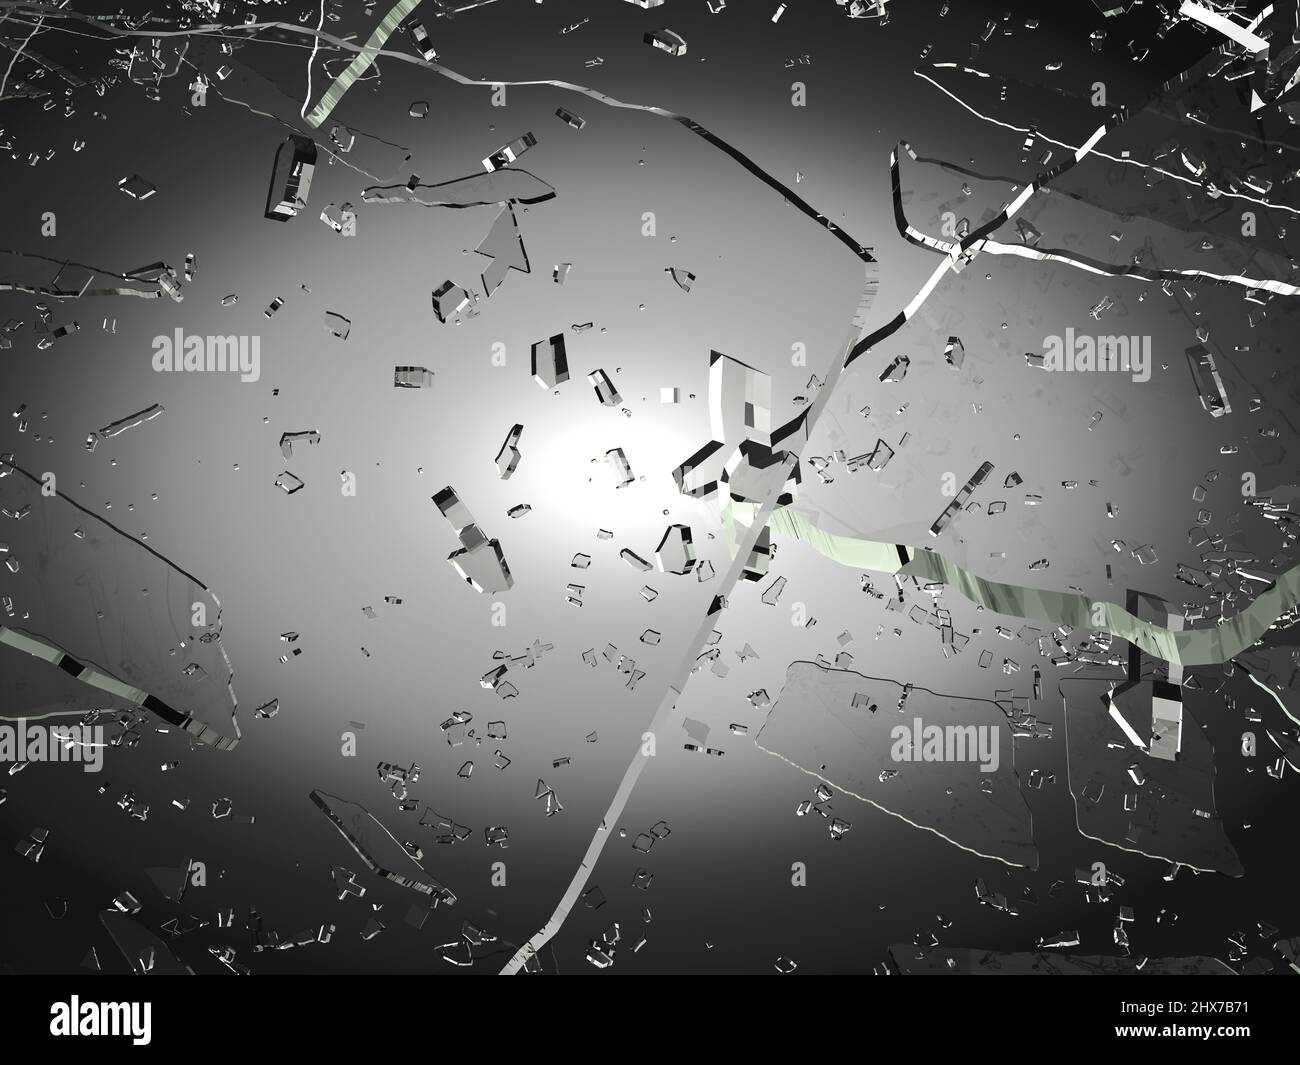 Pieces of glass broken or cracked or smashed, 3d illustration; 3d rendering Stock Photo